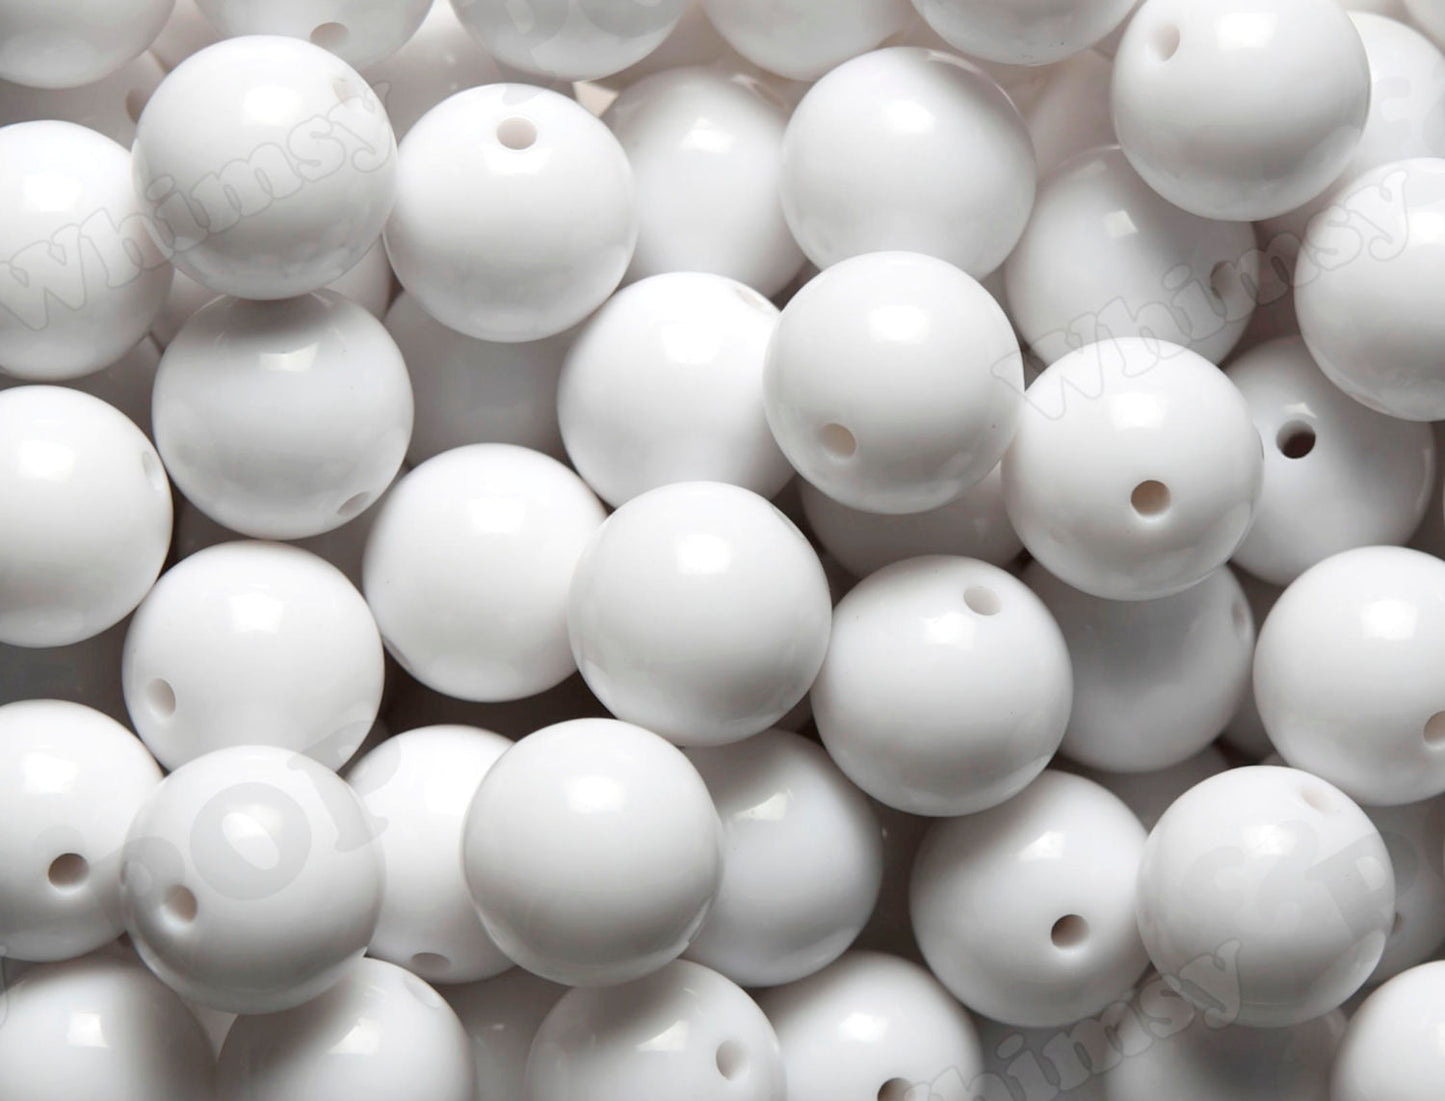 White 20mm Solid Bubblegum Beads for DIY Jewelry by WhimsyandPOP